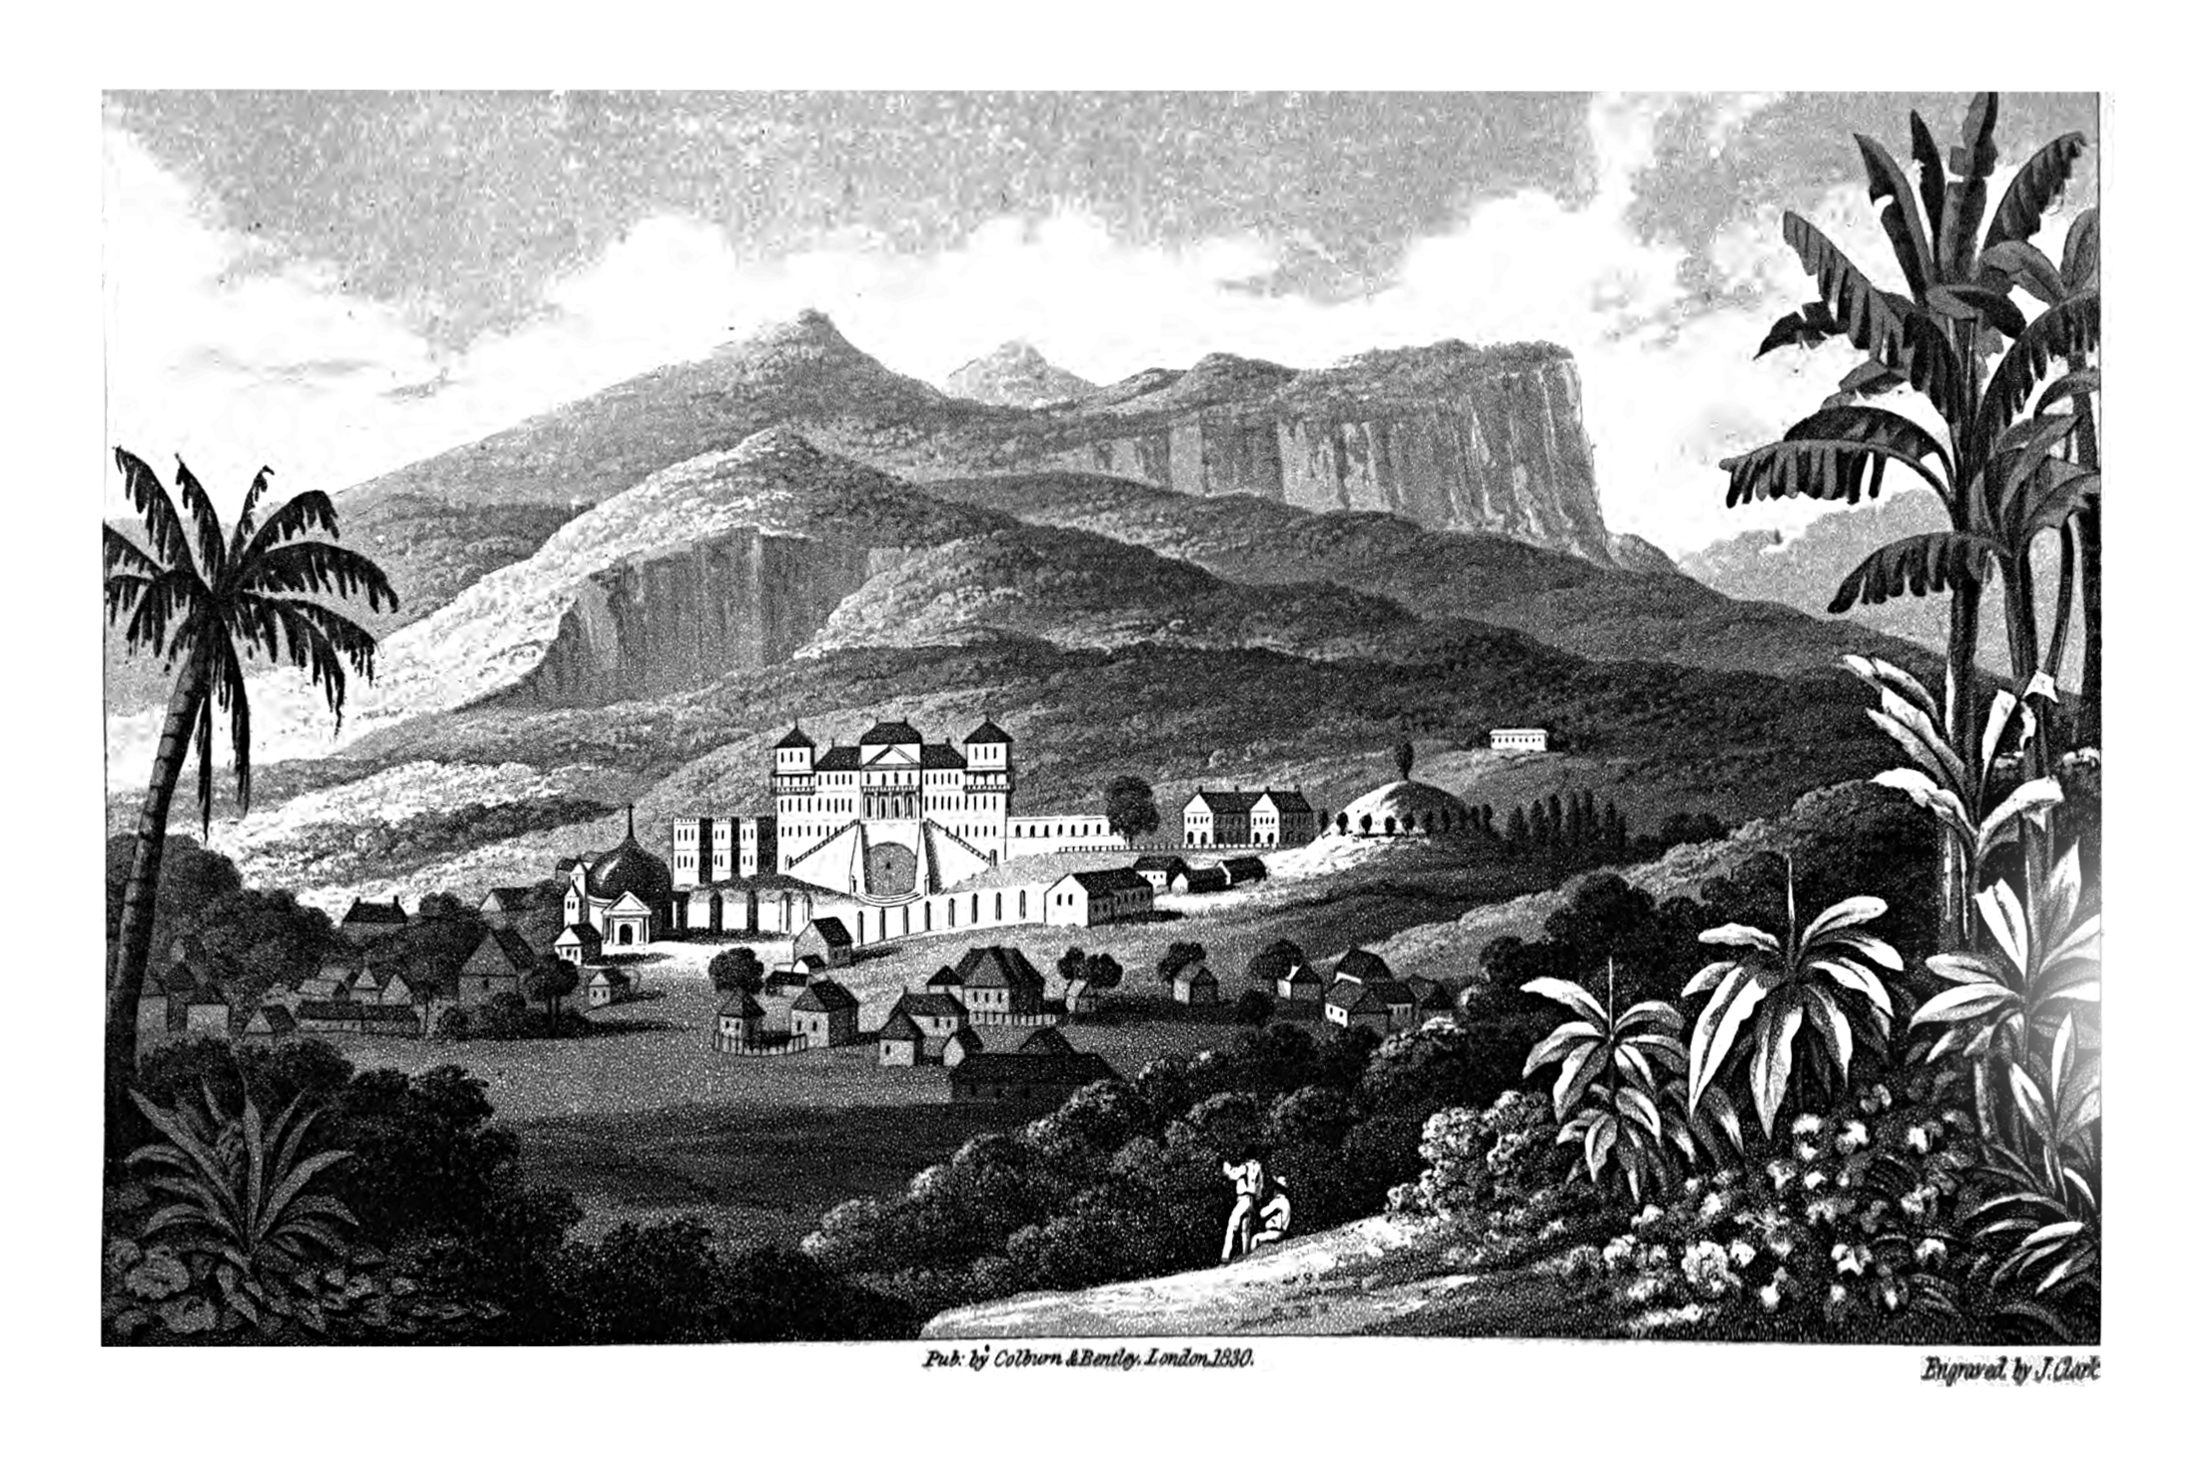 J. Clarke, engraving of Sans Souci Palace, from Charles Mackenzie, Notes on Haiti made during a residence in that republic, H. Colburn and R. Bentley (1830), Volume II.